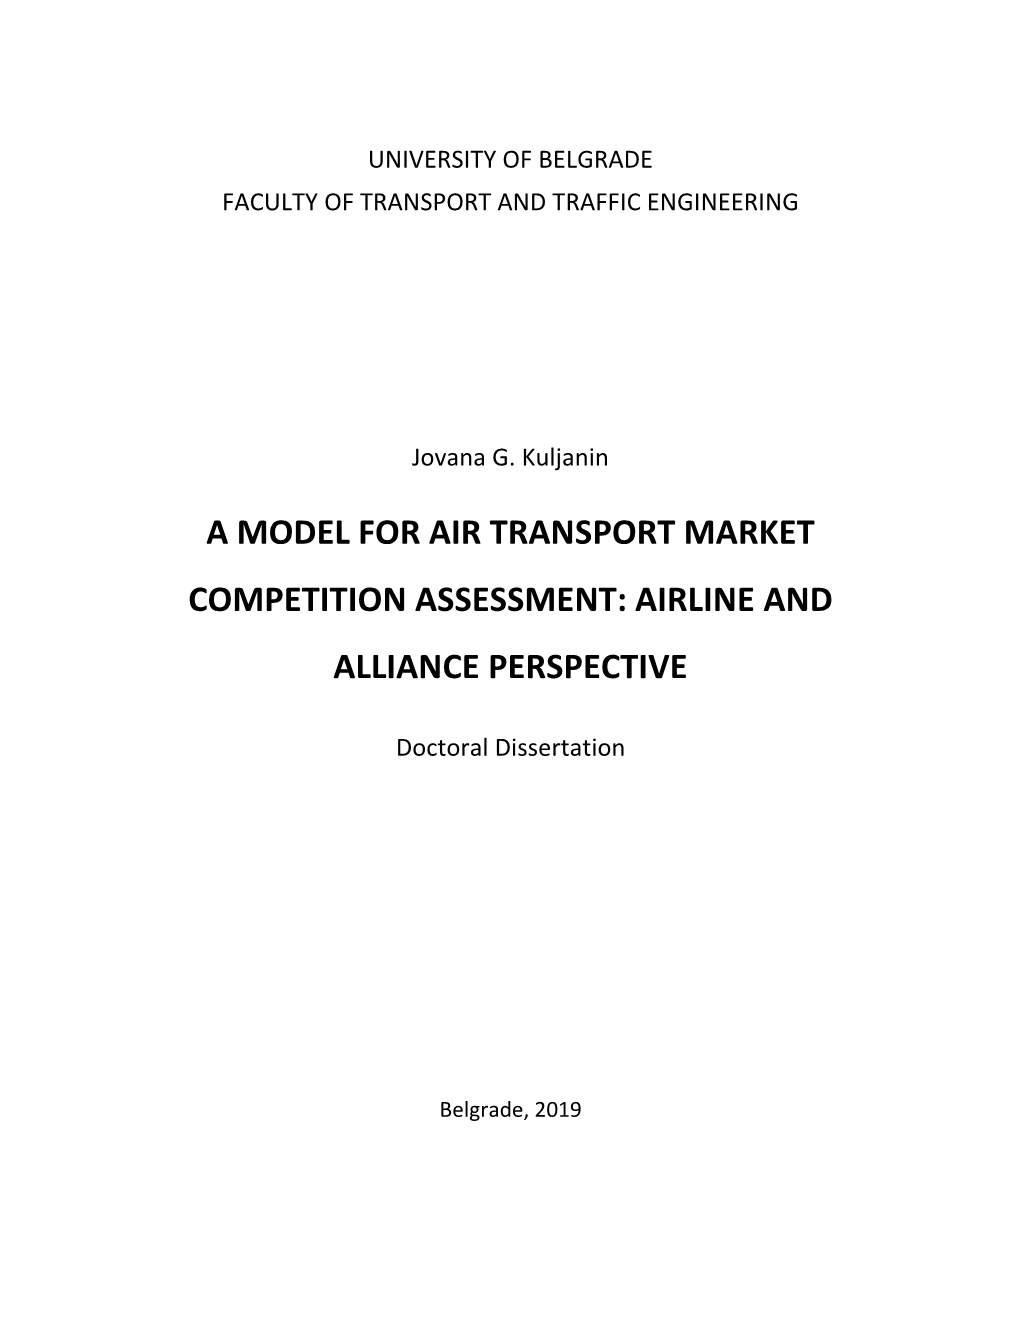 A Model for Air Transport Market Competition Assessment: Airline and Alliance Perspective